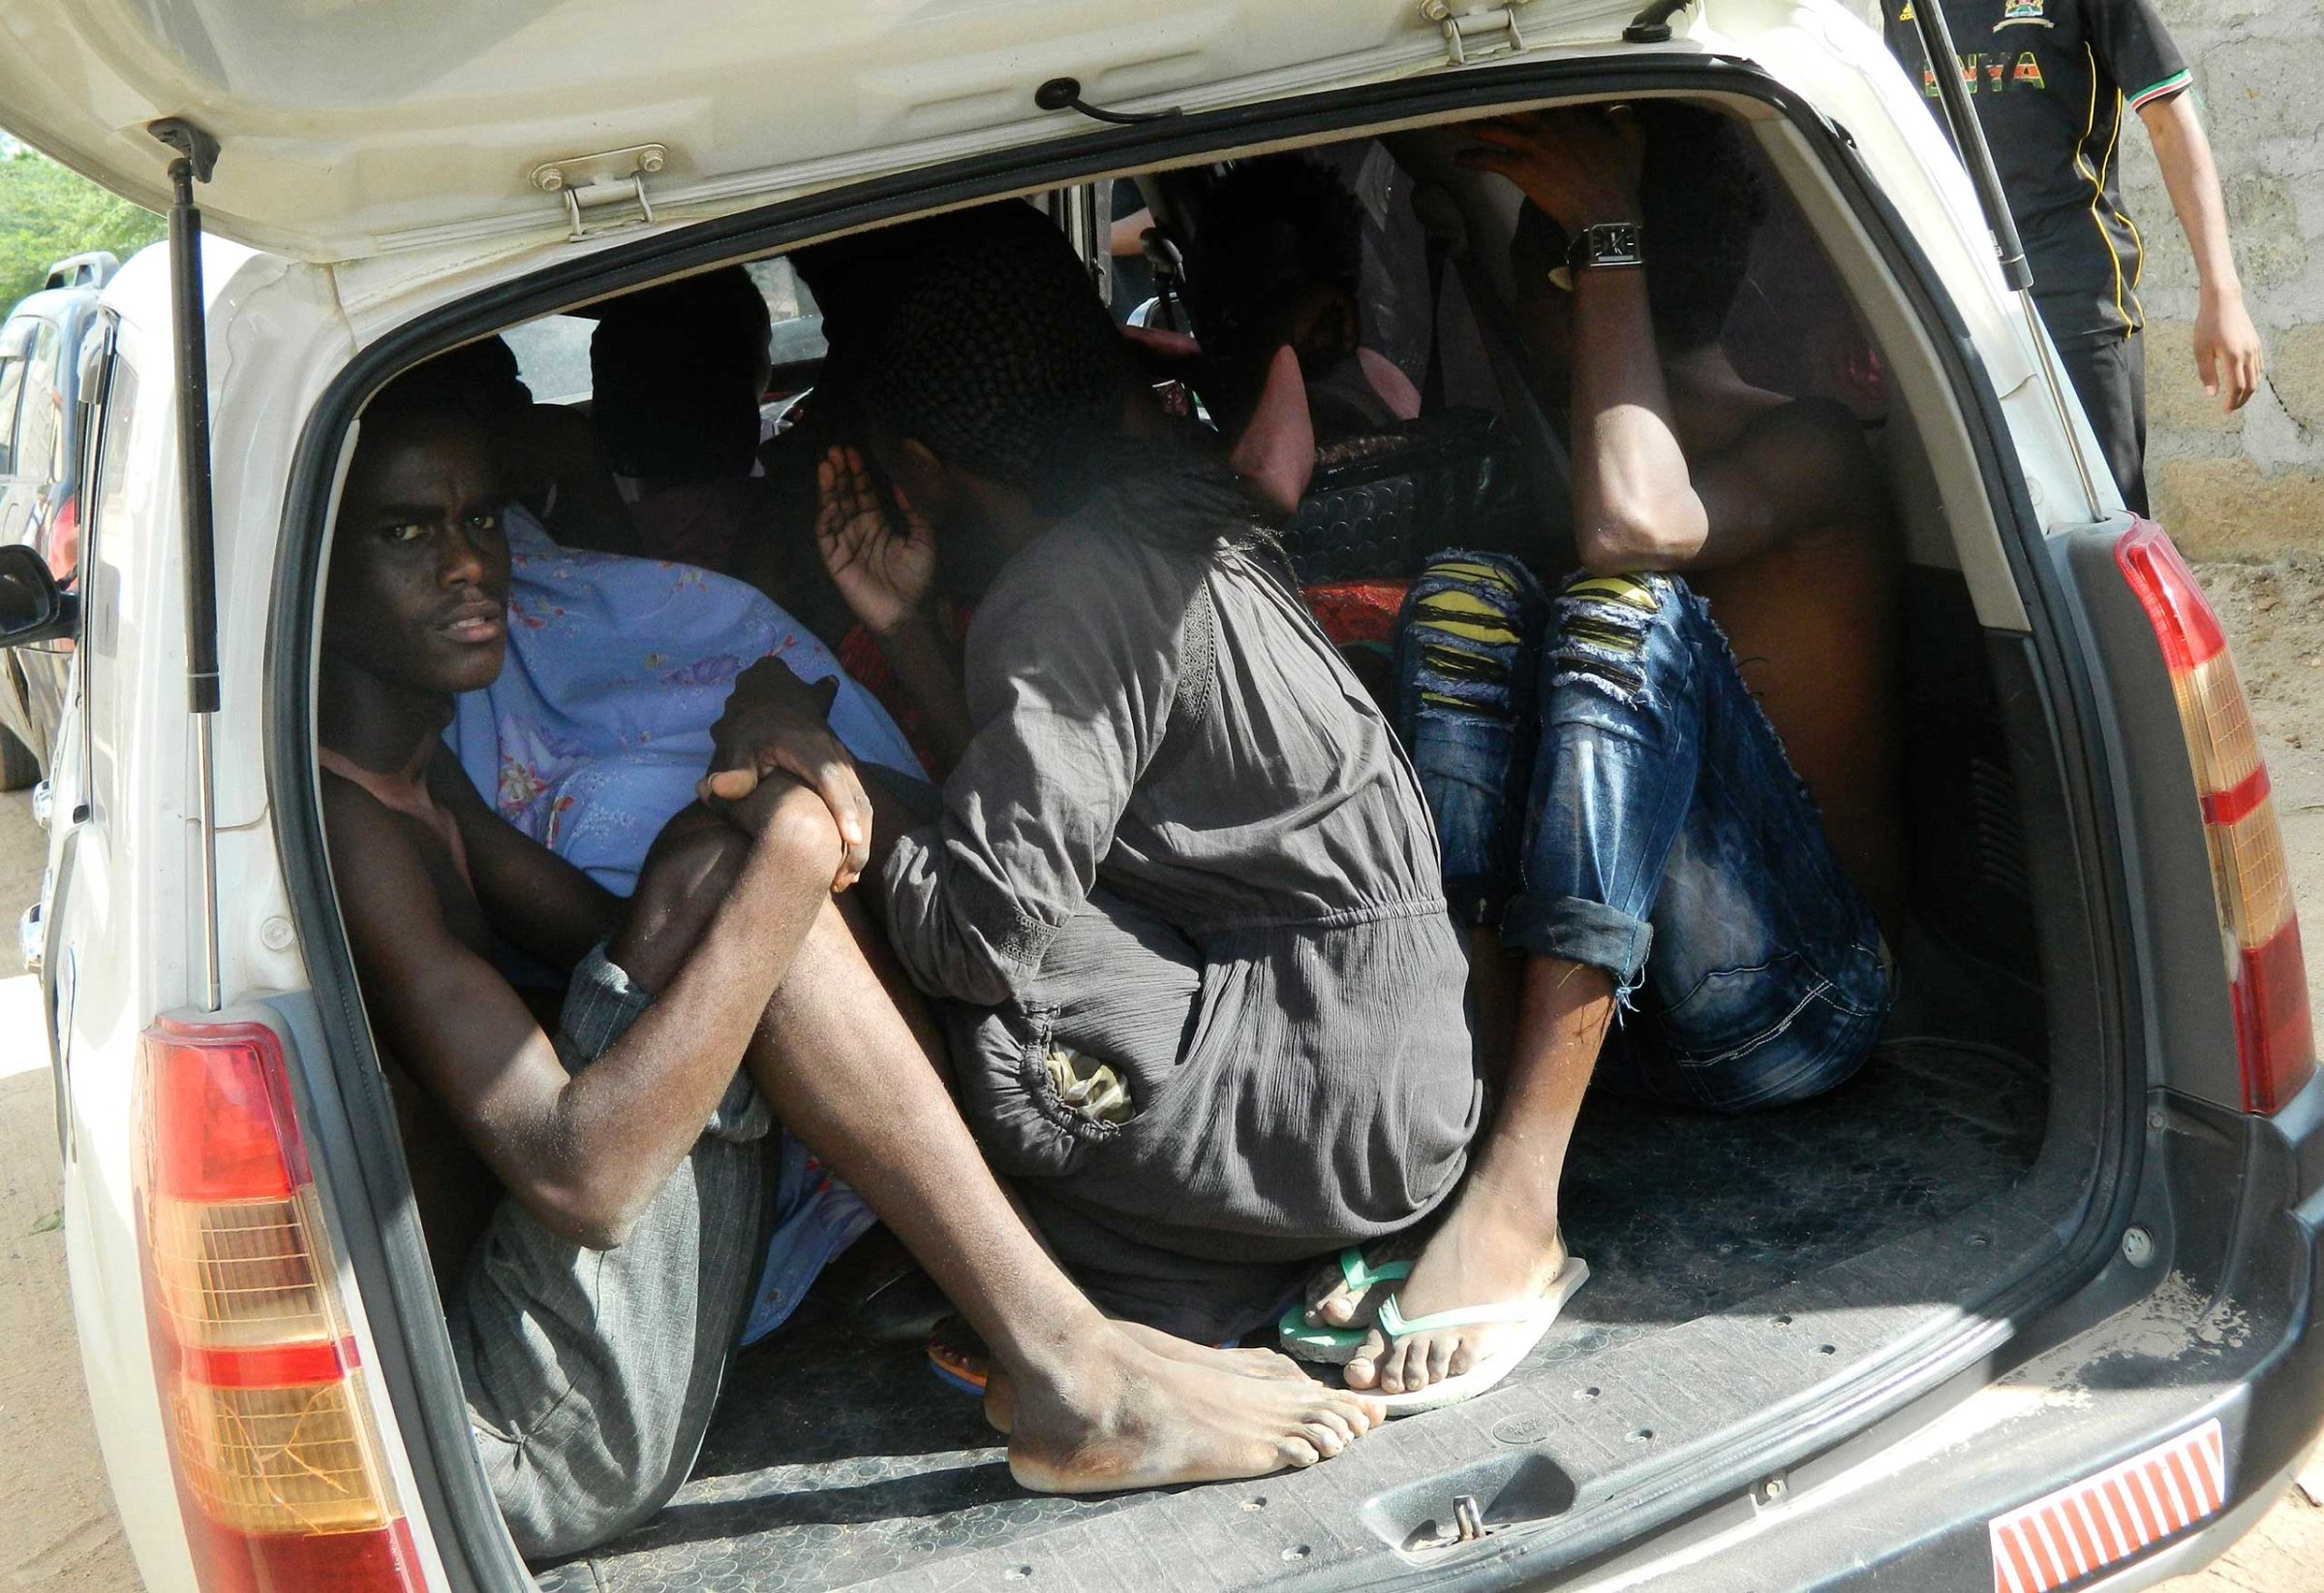 Students of the Garissa University College take shelter in a vehicle after fleeing from an attack by gunmen in Garissa, Kenya, April 2, 2015.